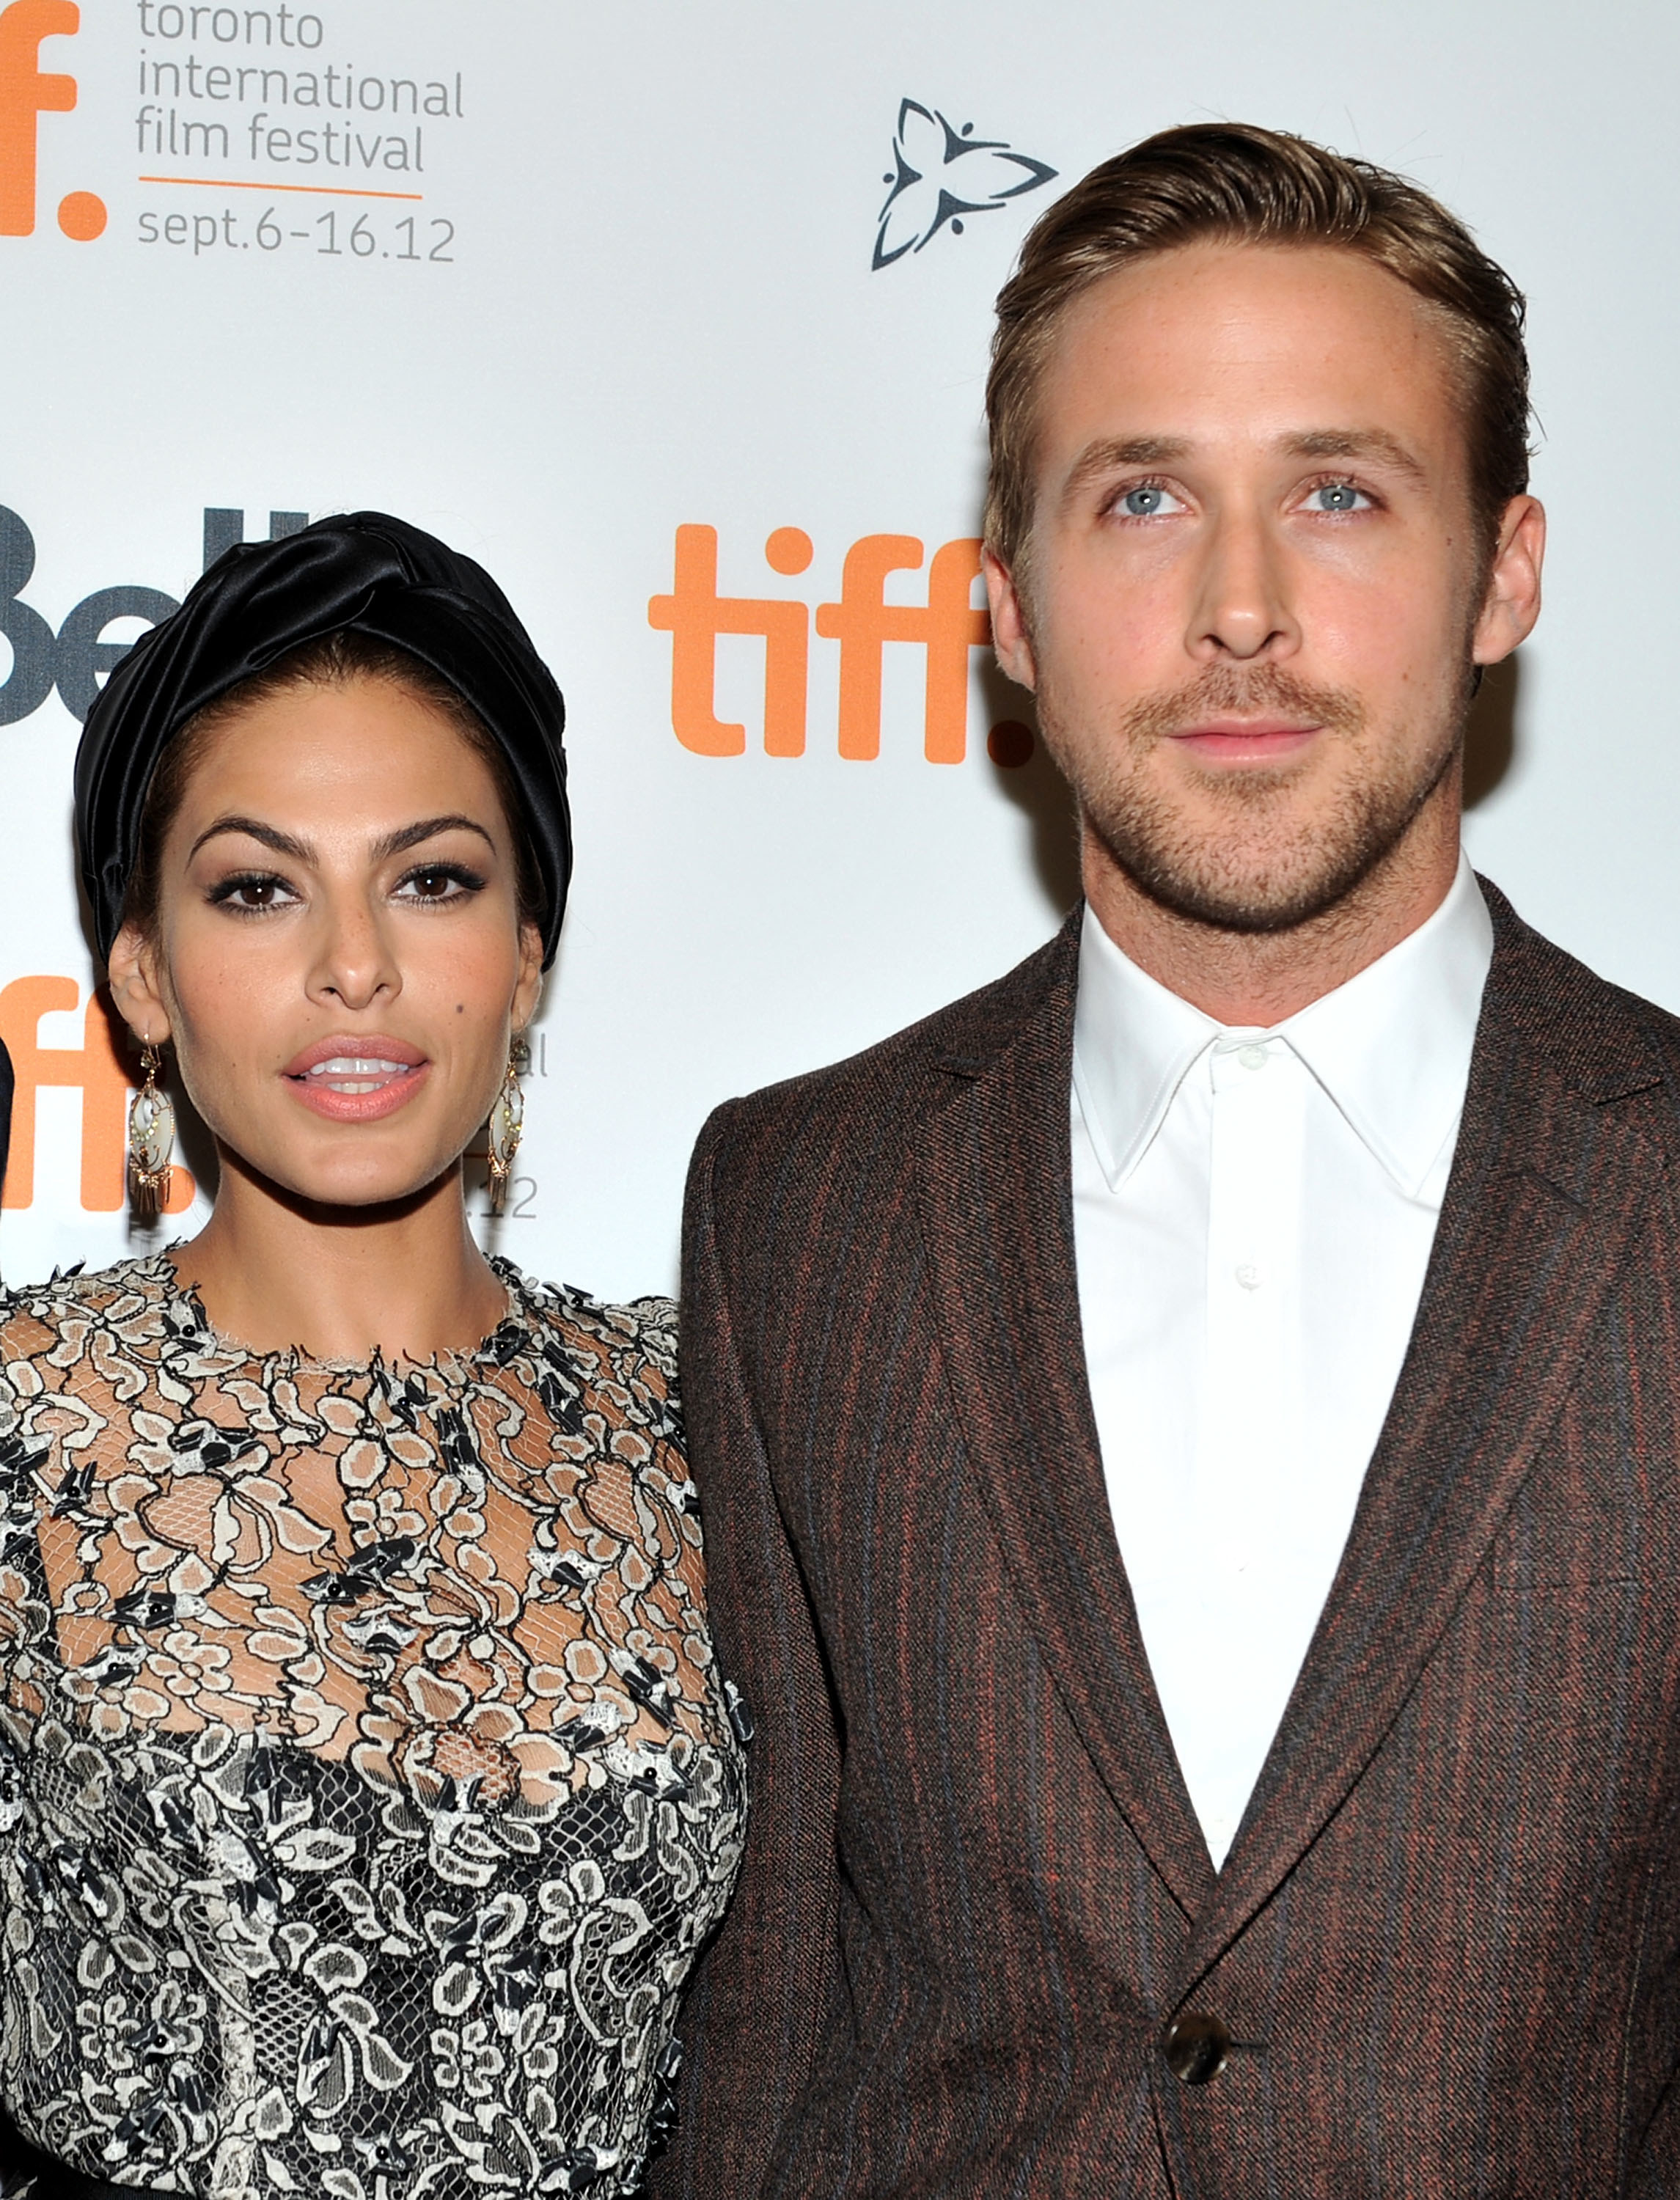 Eva Mendes and Ryan Gosling on the red carpet